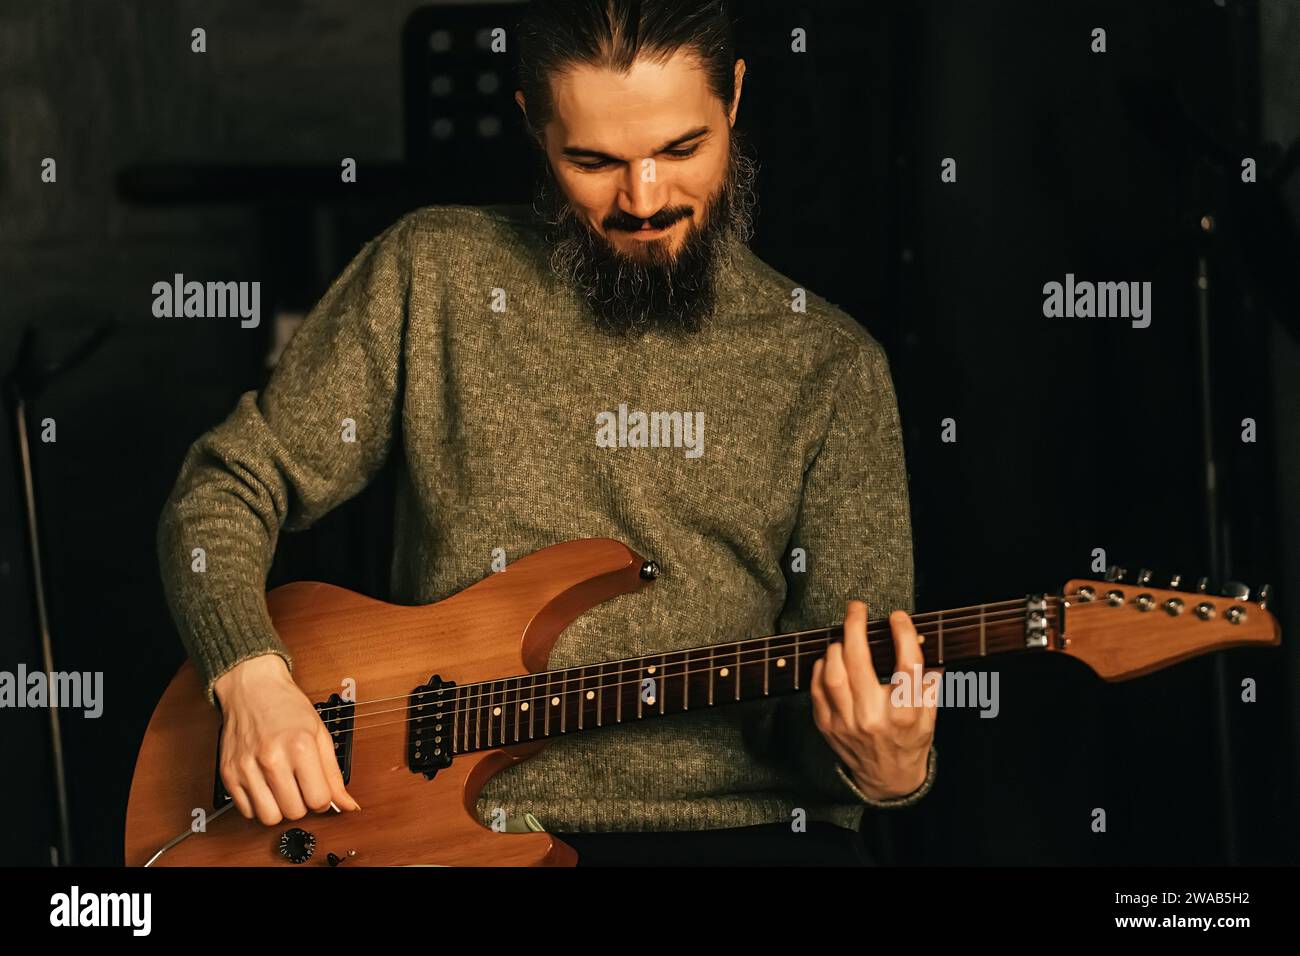 Guitarist play guitar. Concept of music recording studio or band rehearsal and practice. Stock Photo